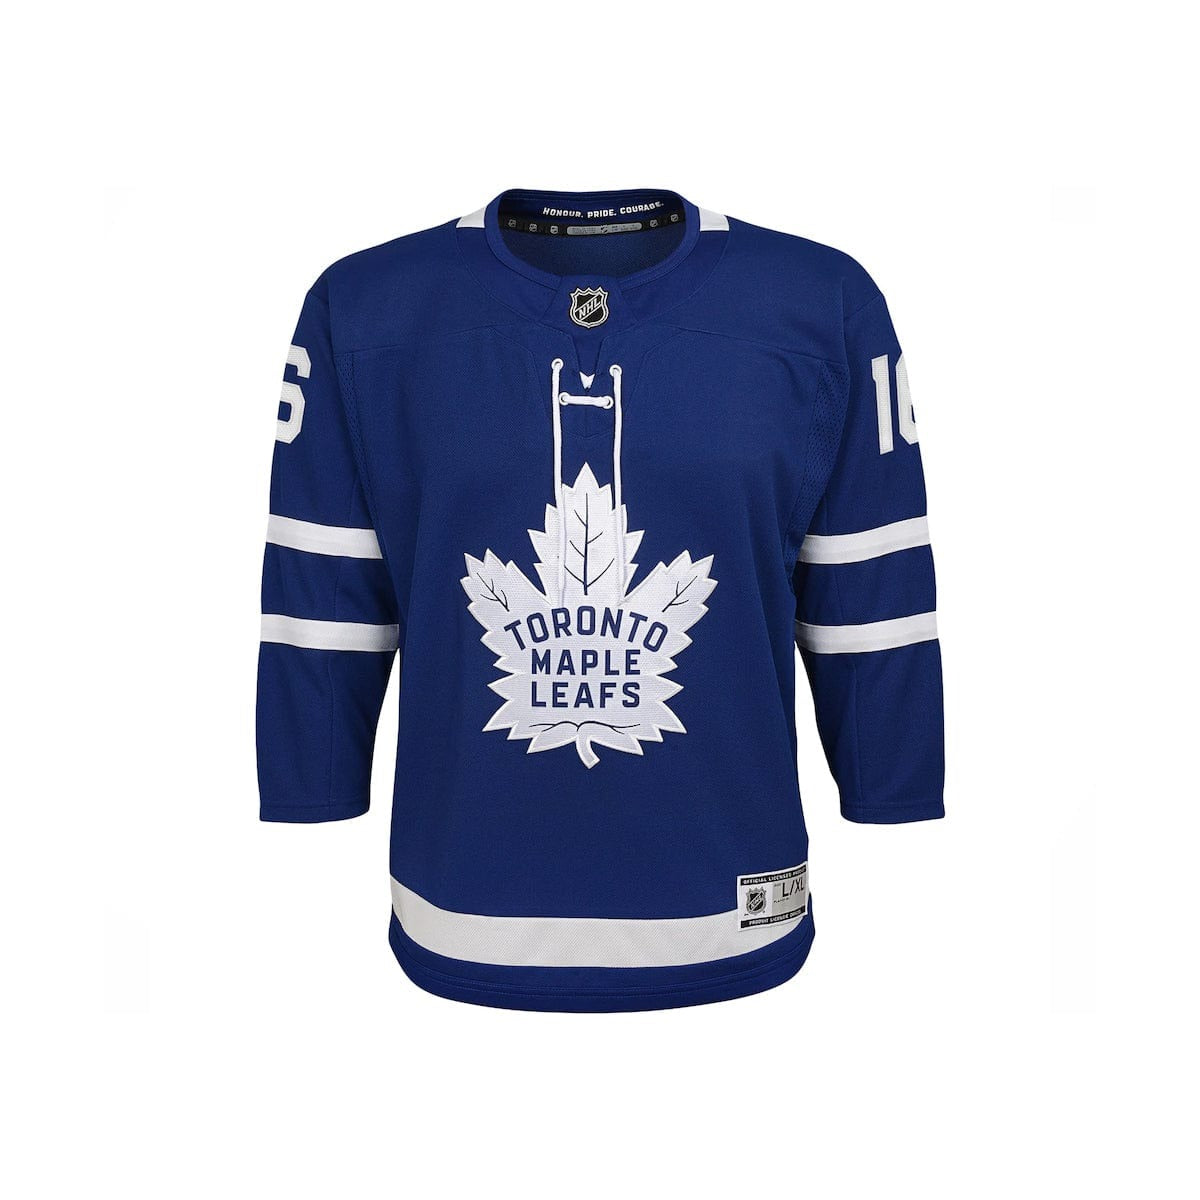 Toronto Maple Leafs Home Outer Stuff Premier Junior Jersey - Mitchell Marner